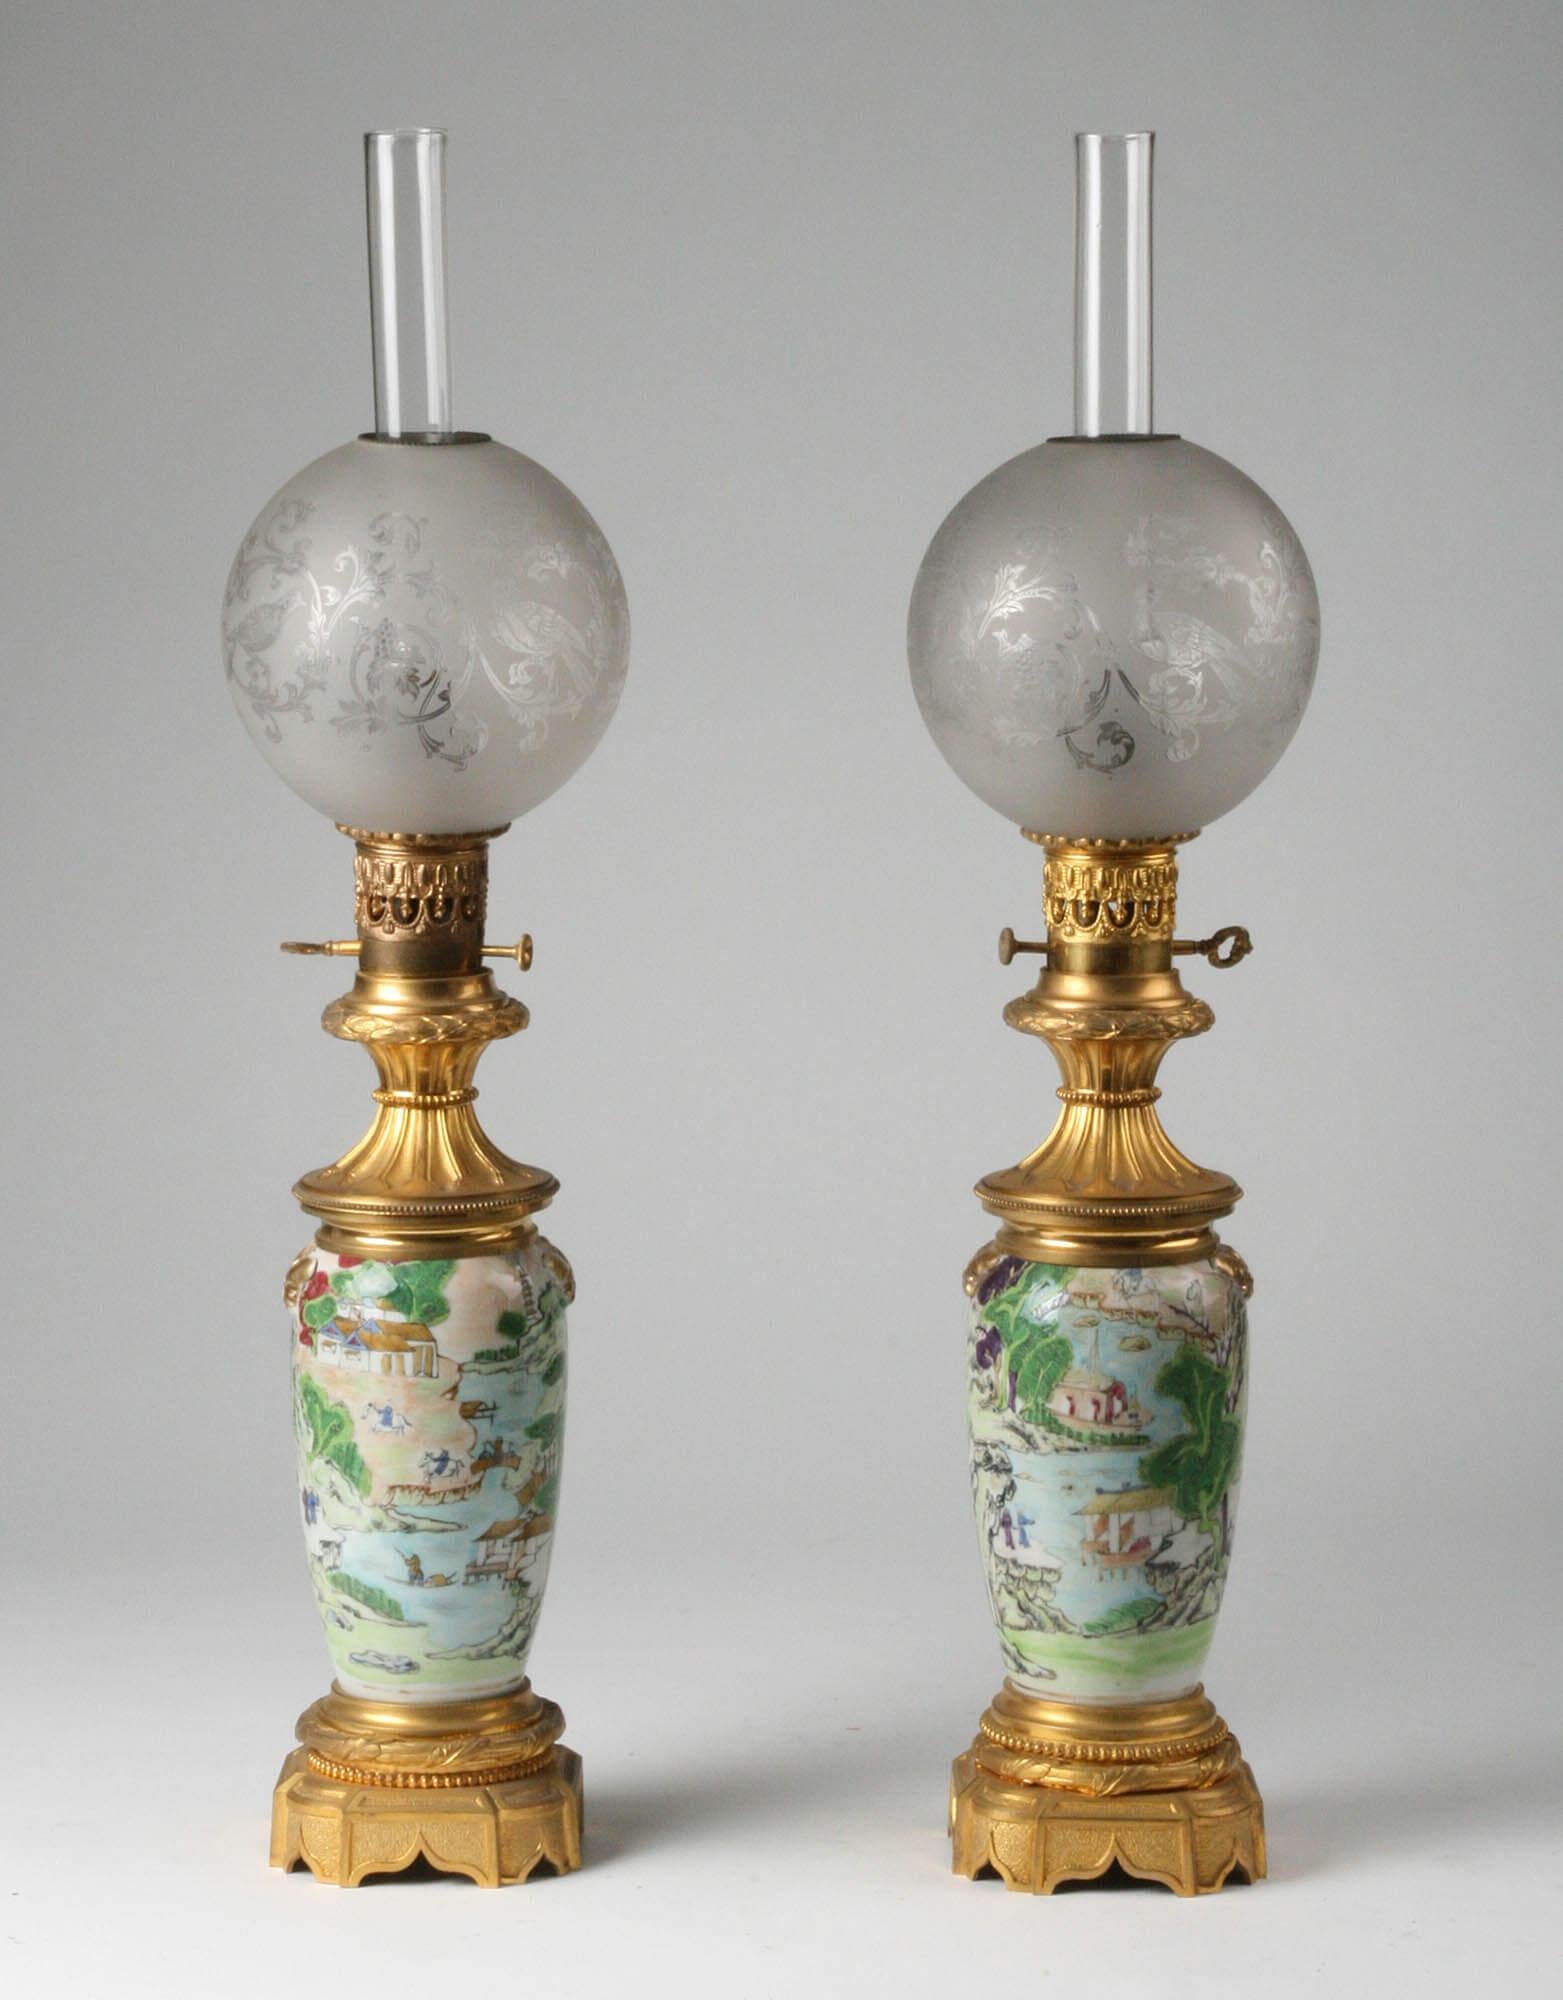 A couple of two large antique French oil lamps. Finely painted Chinese porcelain, mounted on a mercury gilt bronze. The bronzes are refined casted and chiseled. The gilding is in very good condition. On top of an engraved glass lampshade. Note: at